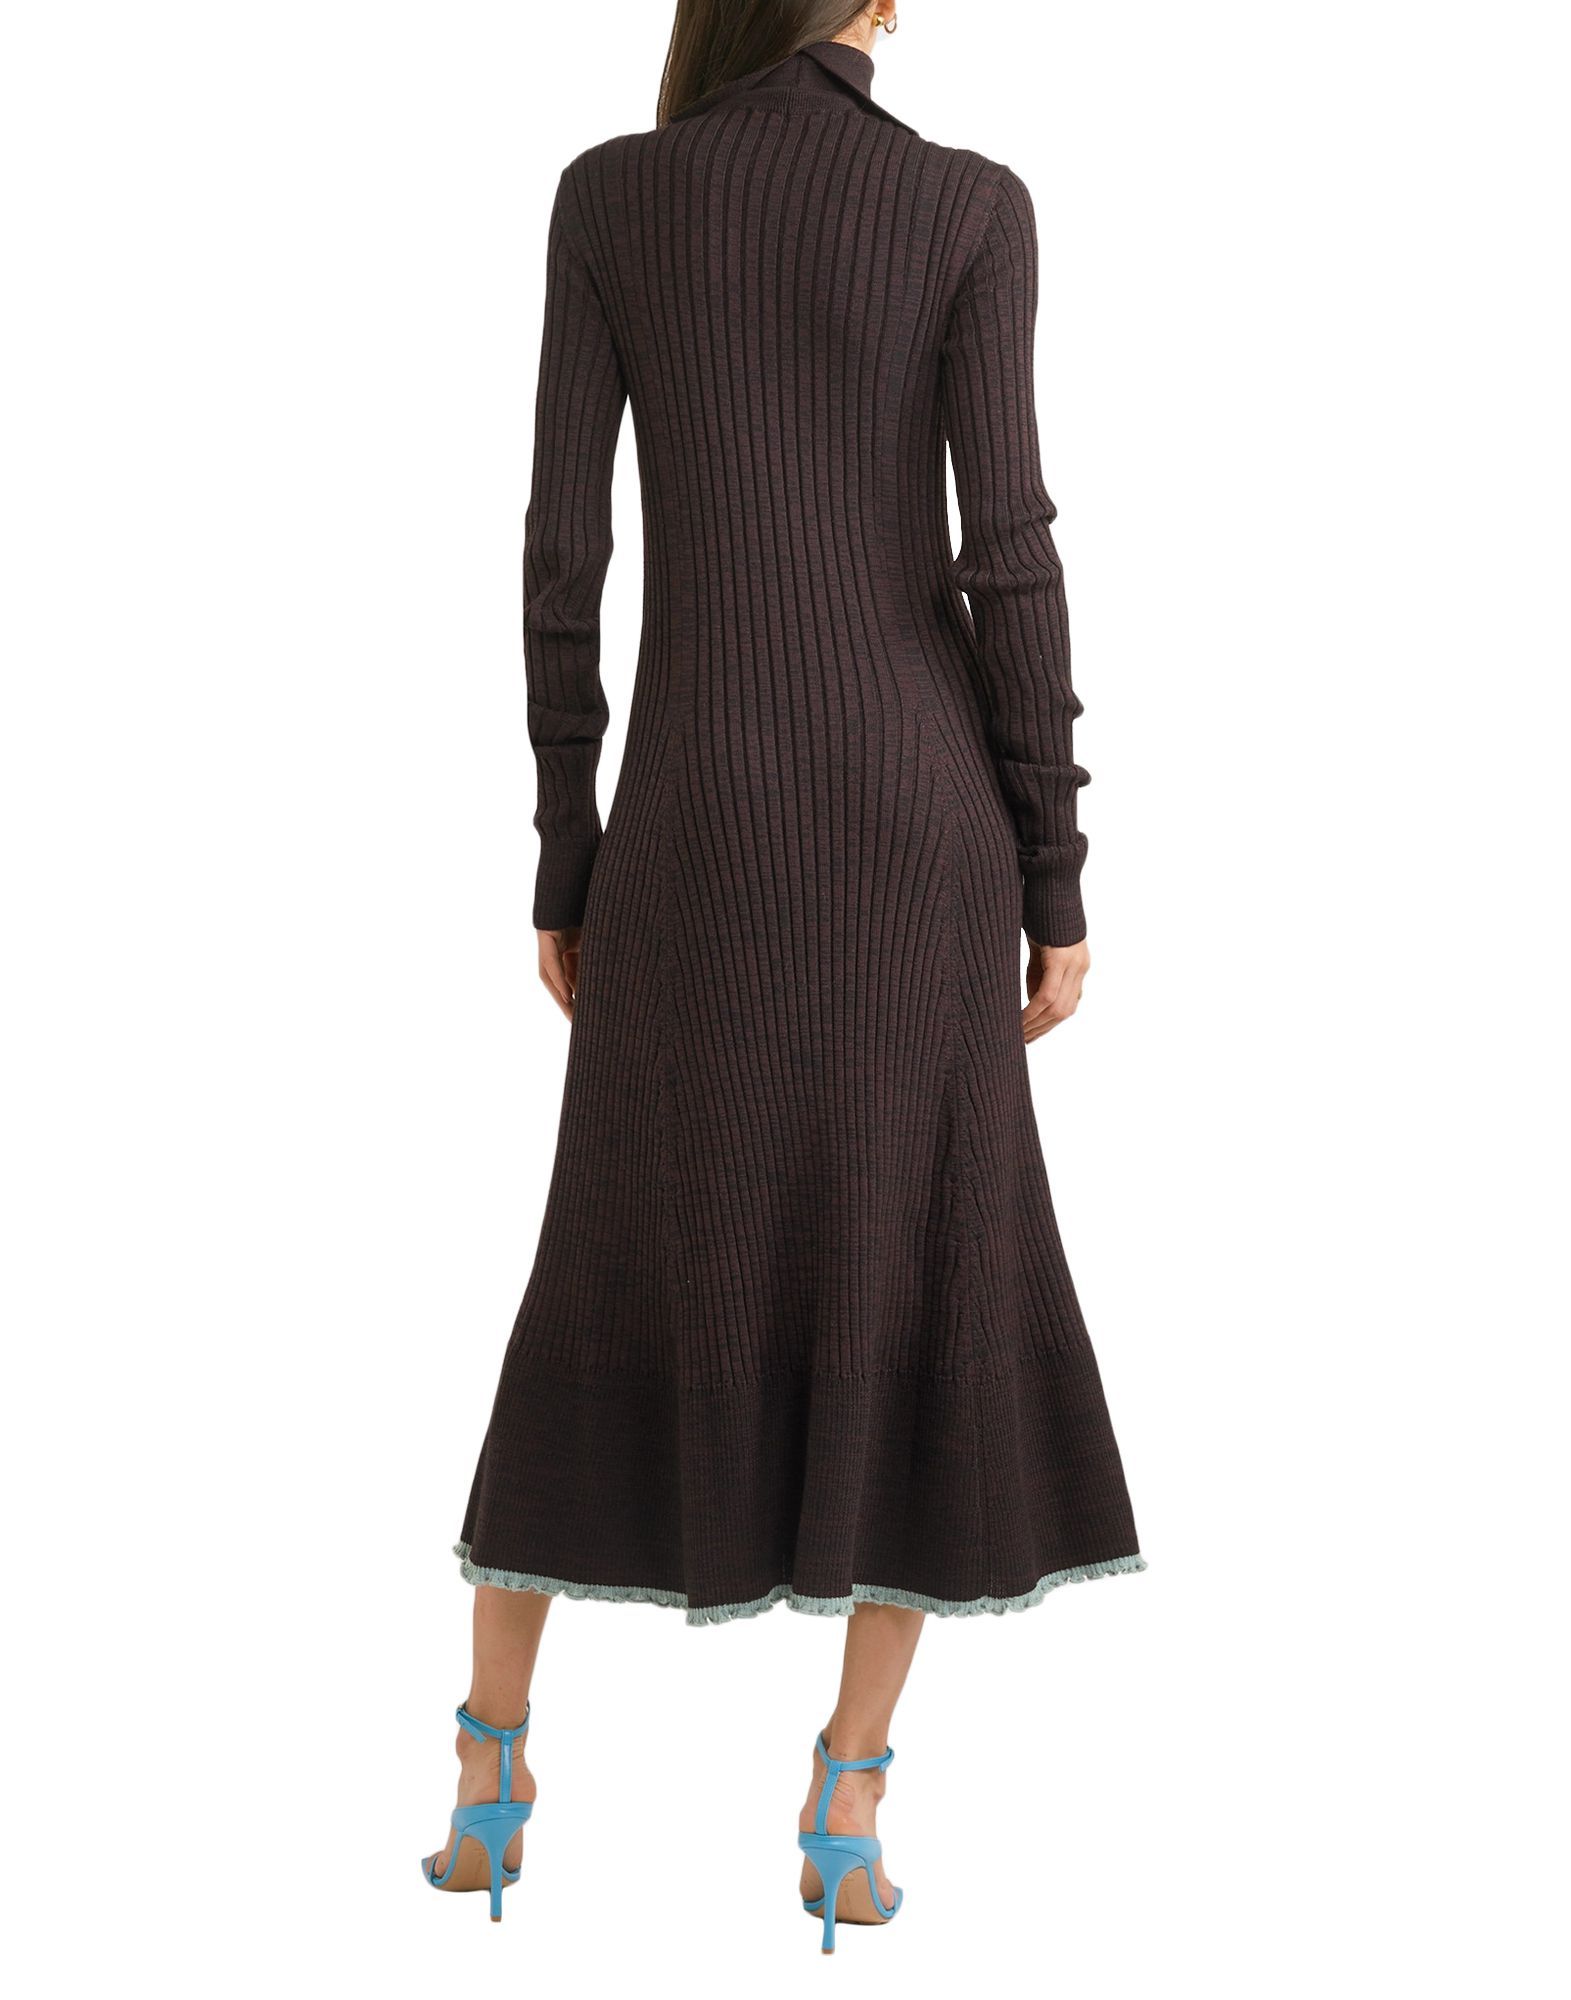 knitted, mélange, no appliqués, two-tone, lightweight knit, turtleneck, long sleeves, no pockets, unlined, large sized